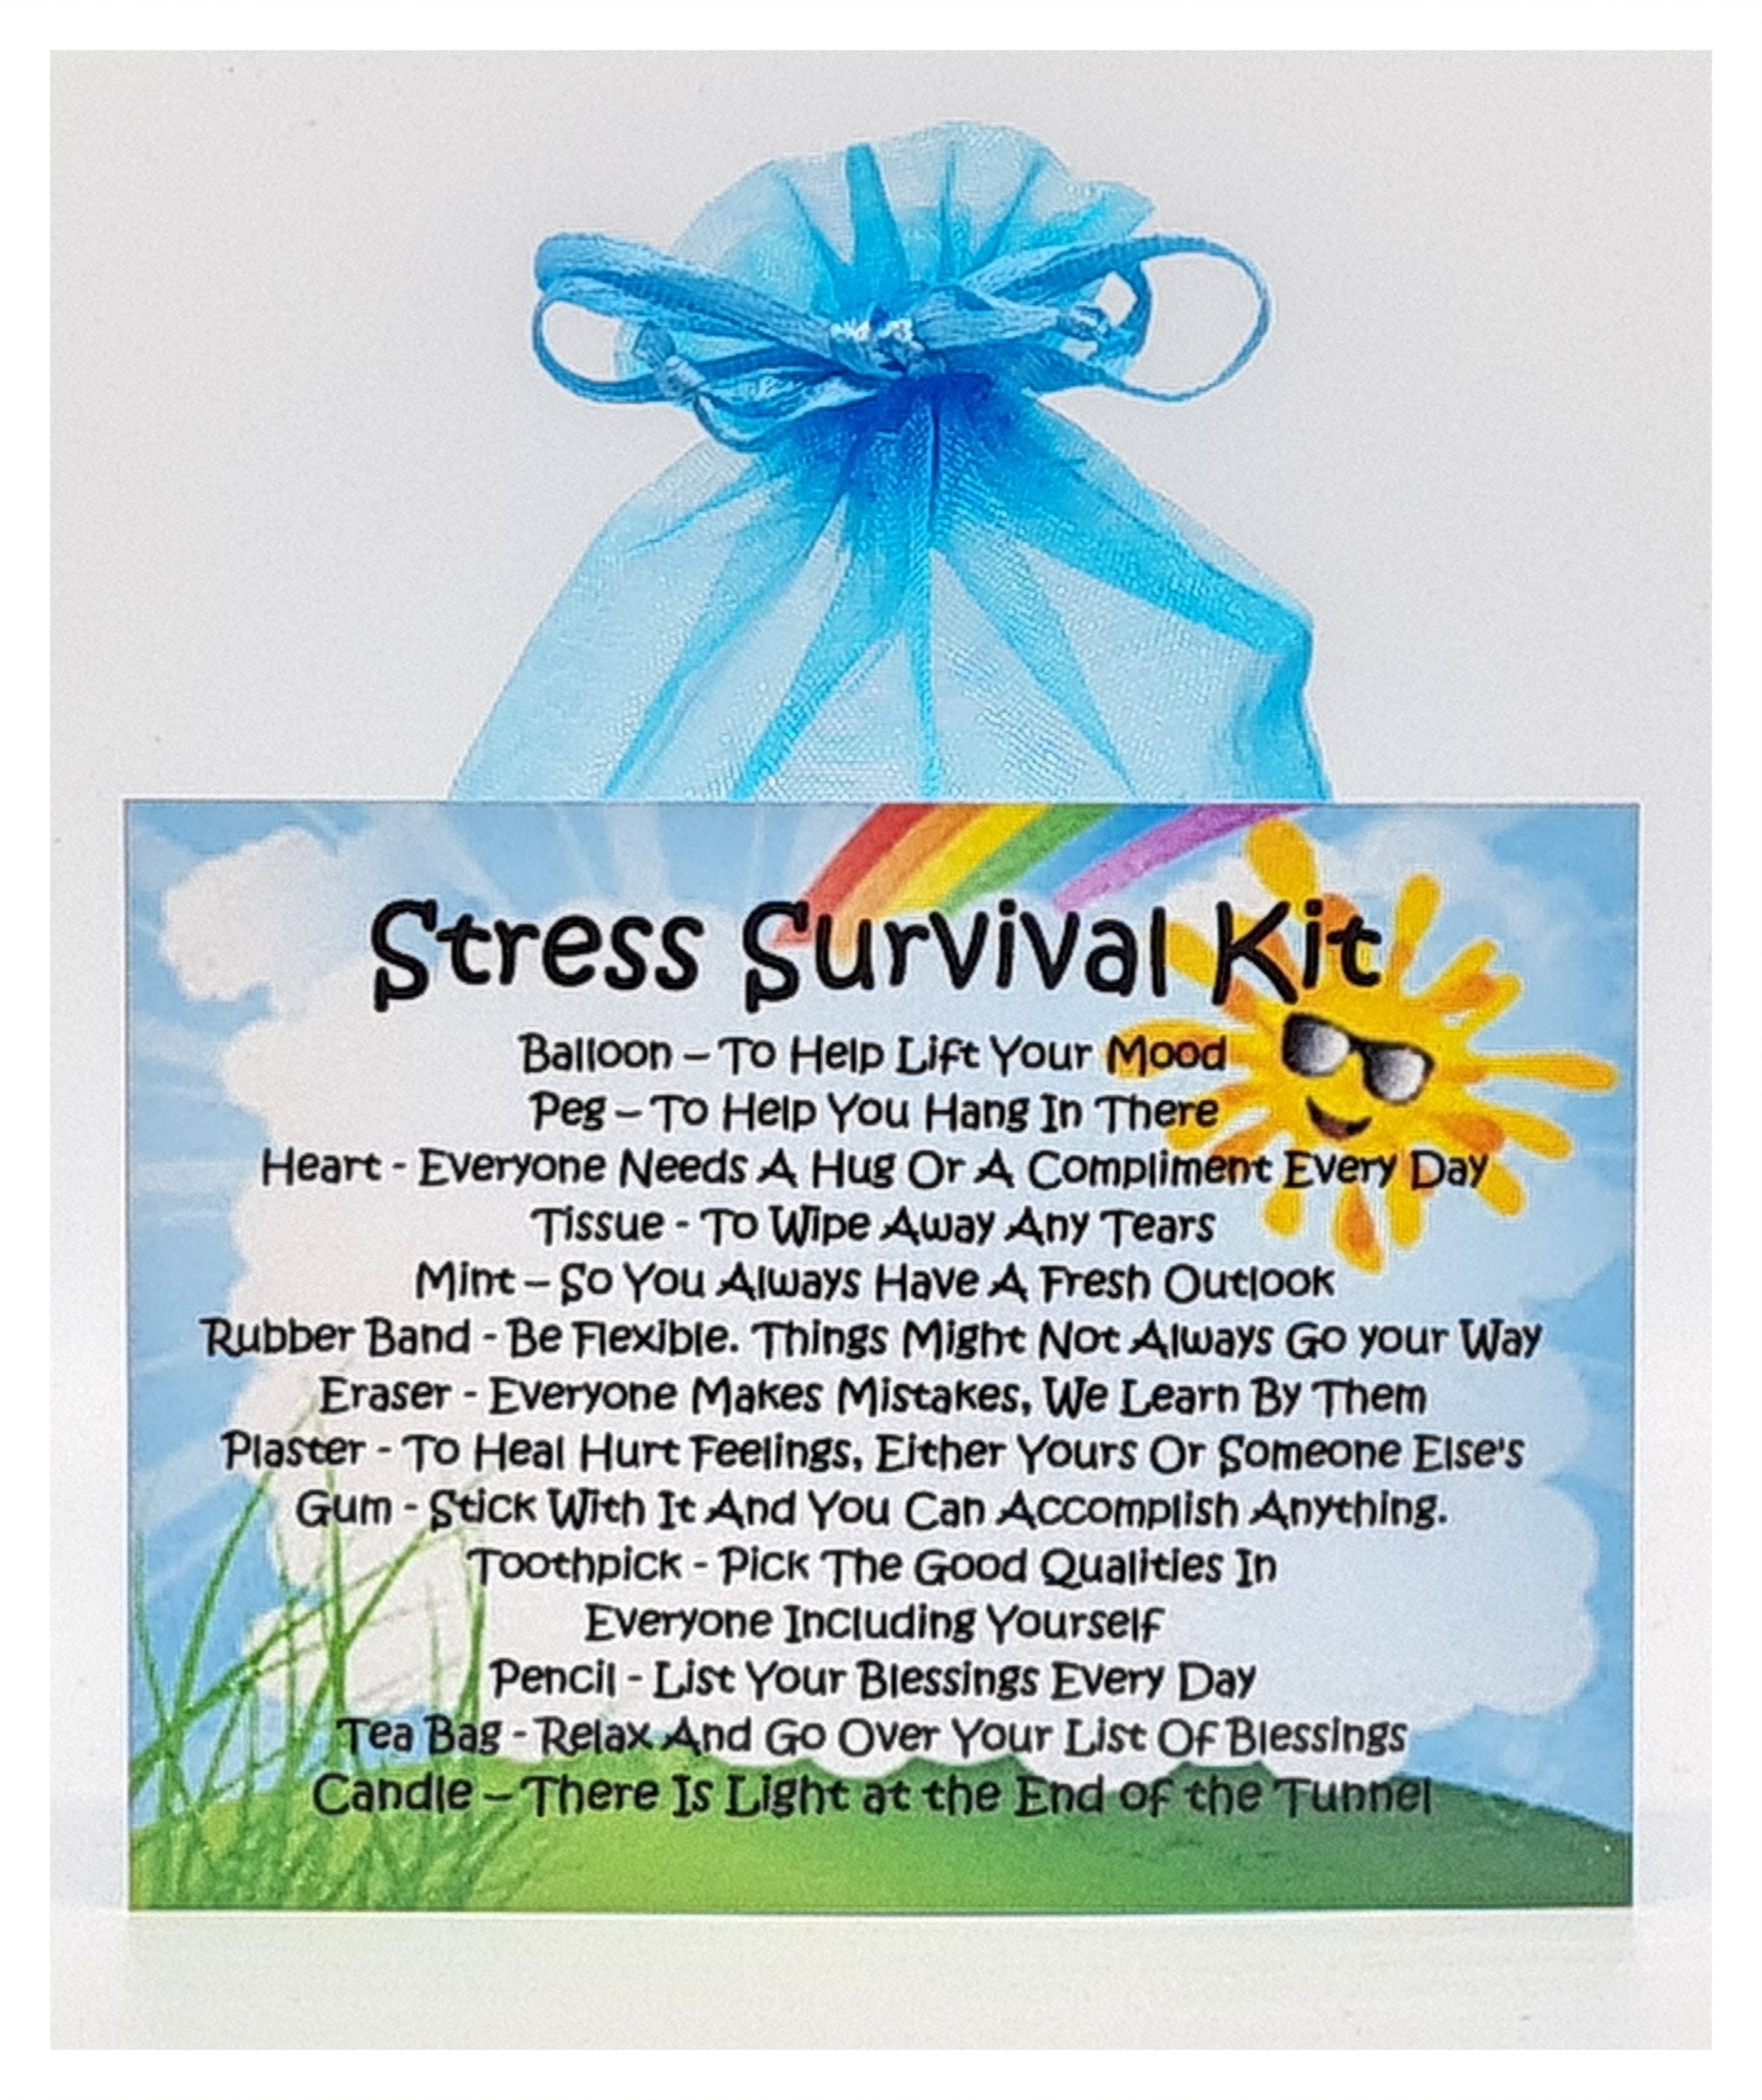 Stress Relief Gifts – Spoiled Store